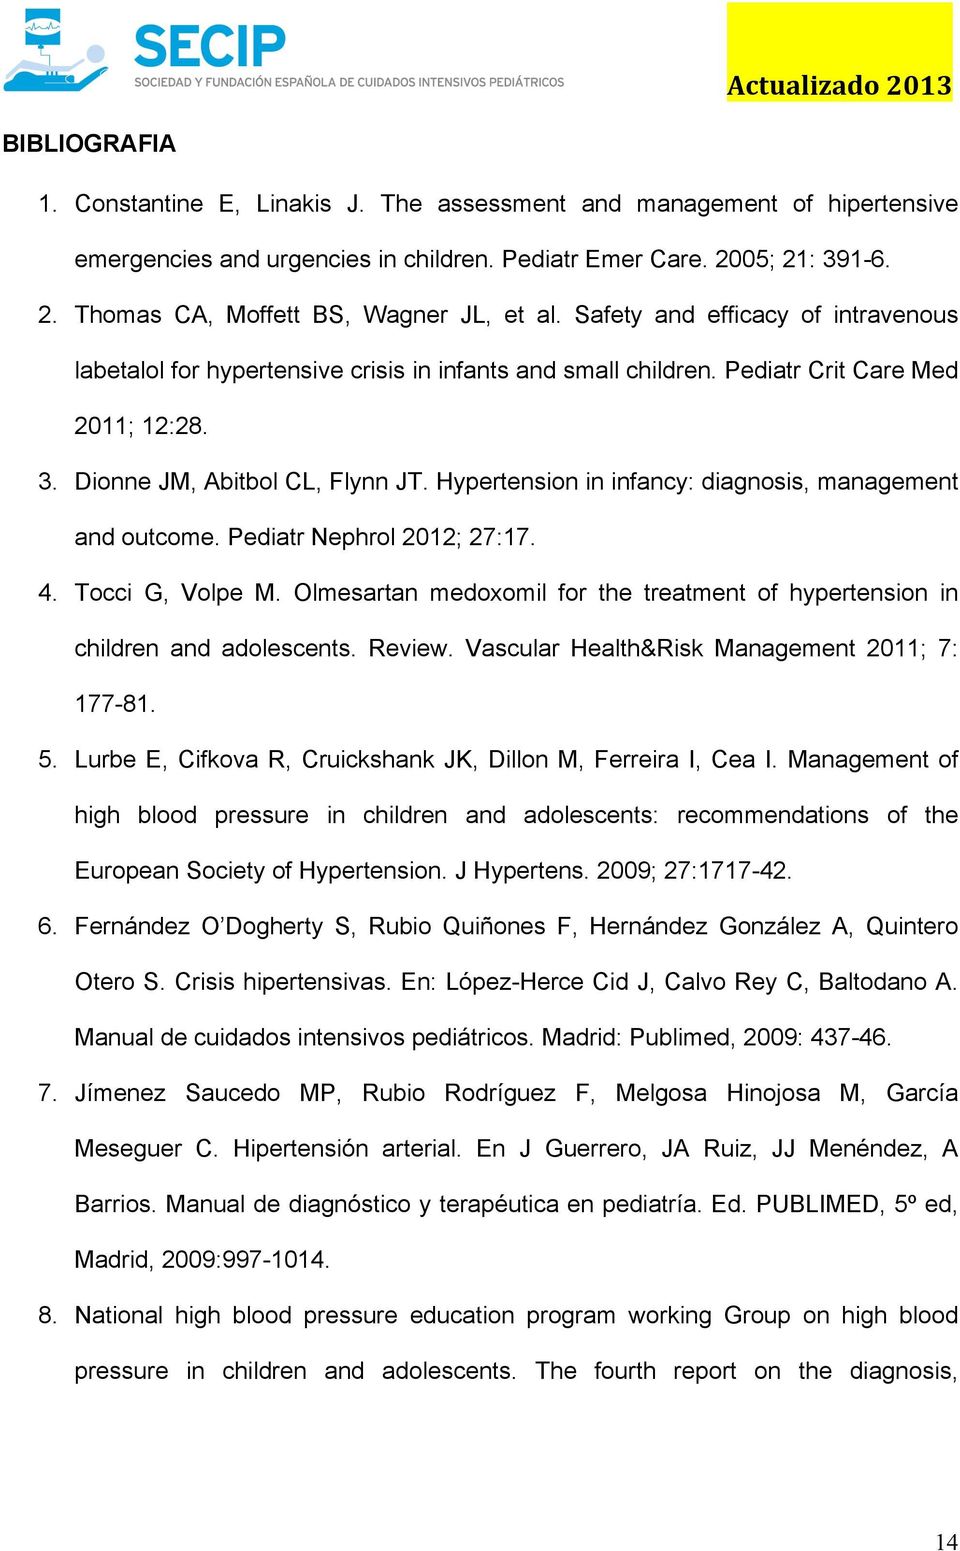 Hypertension in infancy: diagnosis, management and outcome. Pediatr Nephrol 2012; 27:17. 4. Tocci G, Volpe M. Olmesartan medoxomil for the treatment of hypertension in children and adolescents.